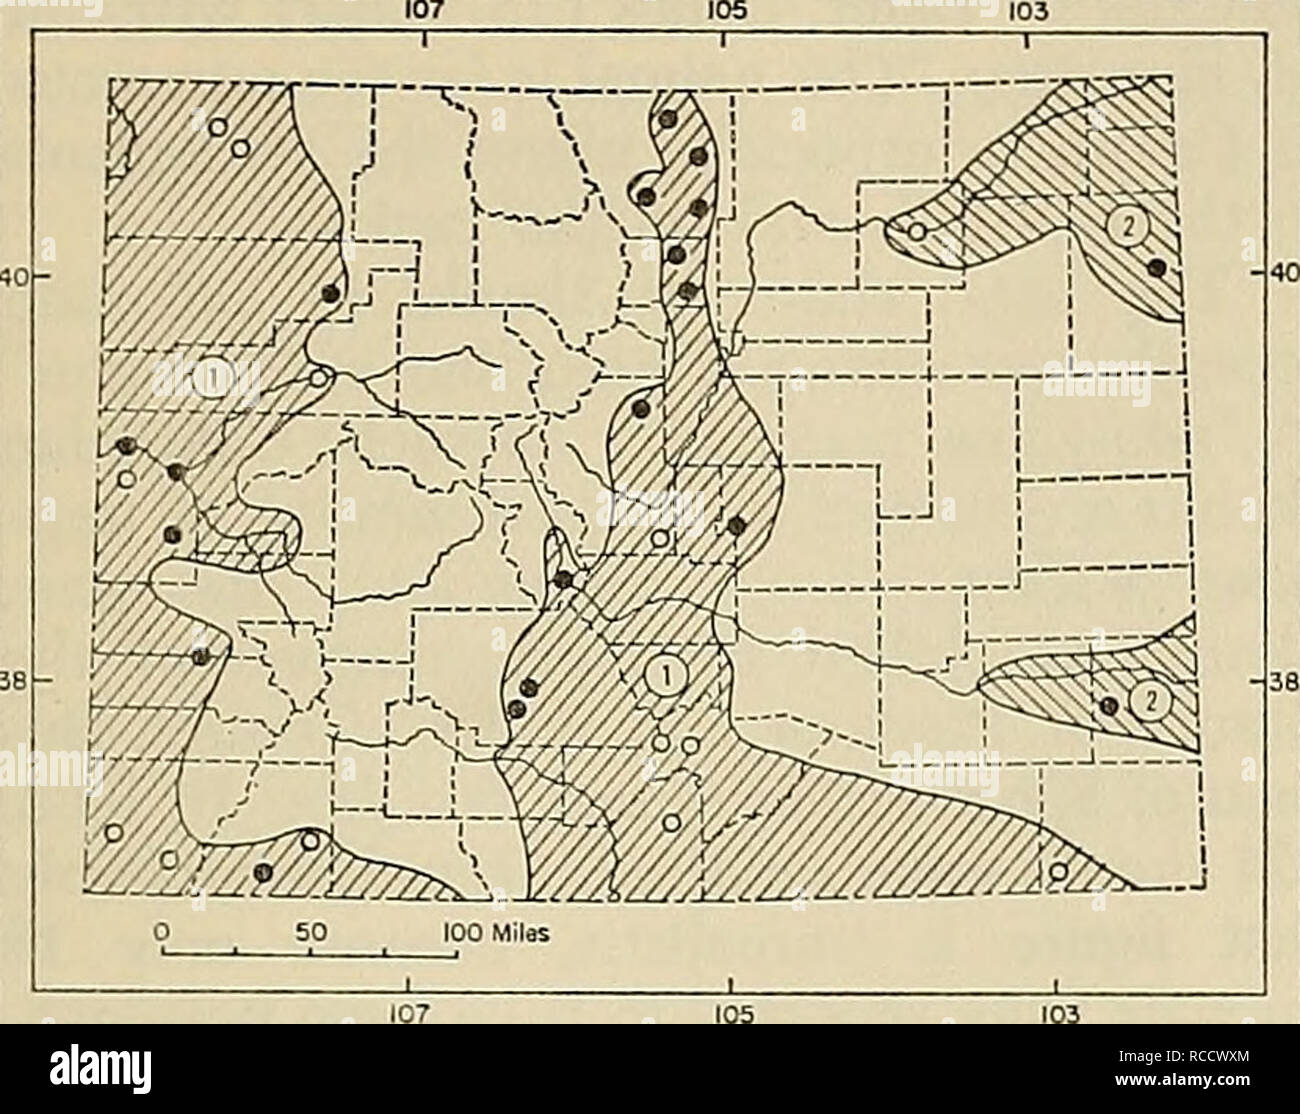 . Distribution of mammals in Colorado. Mammals. 1972 ARMSTRONG: COLORADAN MAMMALS 287. Fig. 105. Distribution of Spilogale putorius in Colorado. 1. S. p. gracilis. 2. S. p. interrupta. For explanation of symbols, see p. 9. 50.2; zygomatic breadth, 35.60 (34.9-38.6), 33.0, 30.5; interorbital constriction, 14.56 (14.1-15.1), 13.9, 13.5; postorbital constric- tion, 13.20 (12.8-13.9), —, 13.4; mastoid breadth, 31.55 (29.1-33.3), 28.3, 27.2; length of maxillary toothrow, 17.43 (16.1-18.8), 16.1, 16.3. Remarks.—It is not known whether the ranges of S. p. gracilis and S. p. interrupta meet in Colorad Stock Photo